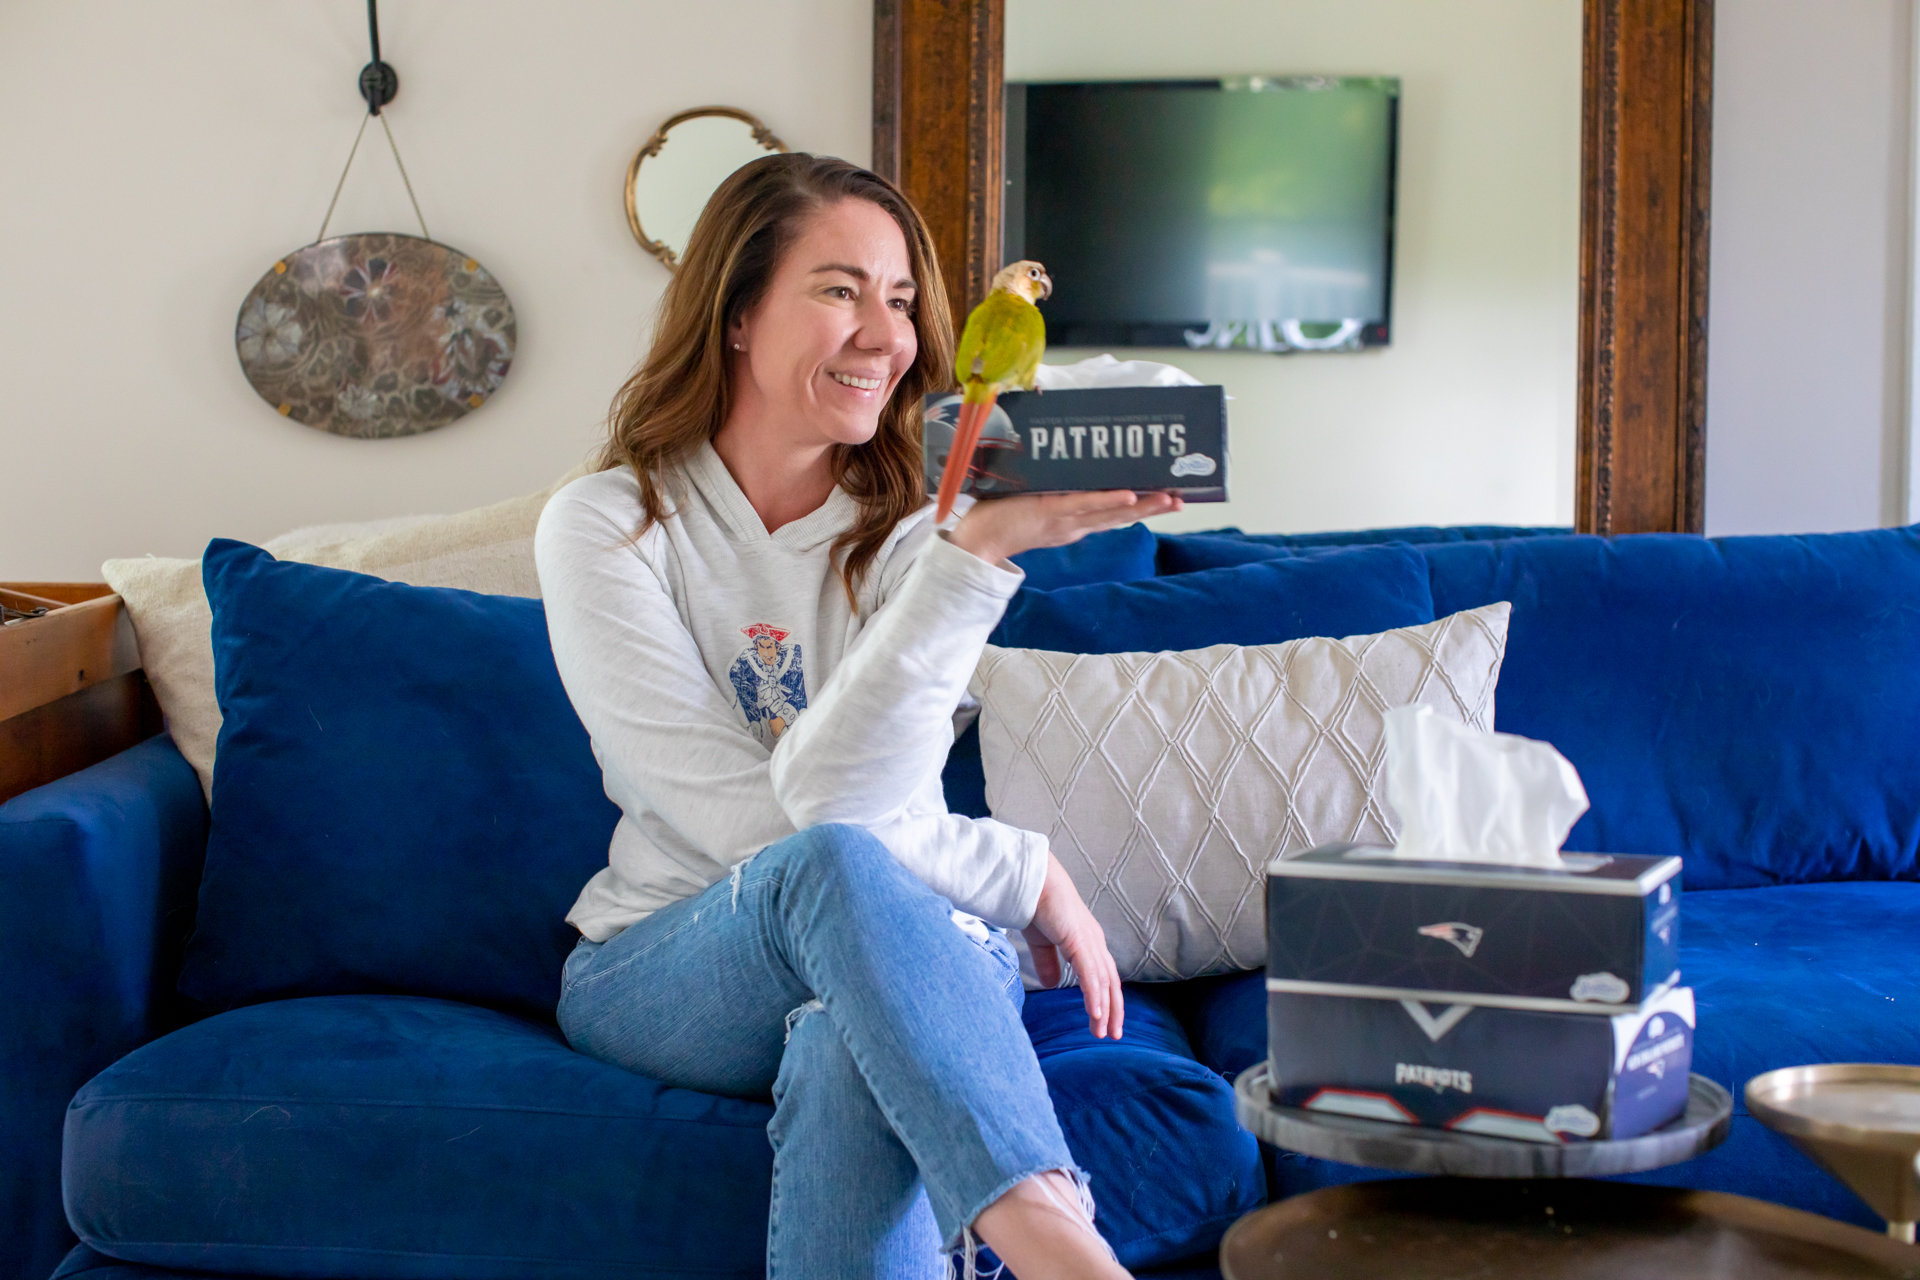 Scotties Facial Tissues review featured by top US life and style blogger, Shannon Shipman